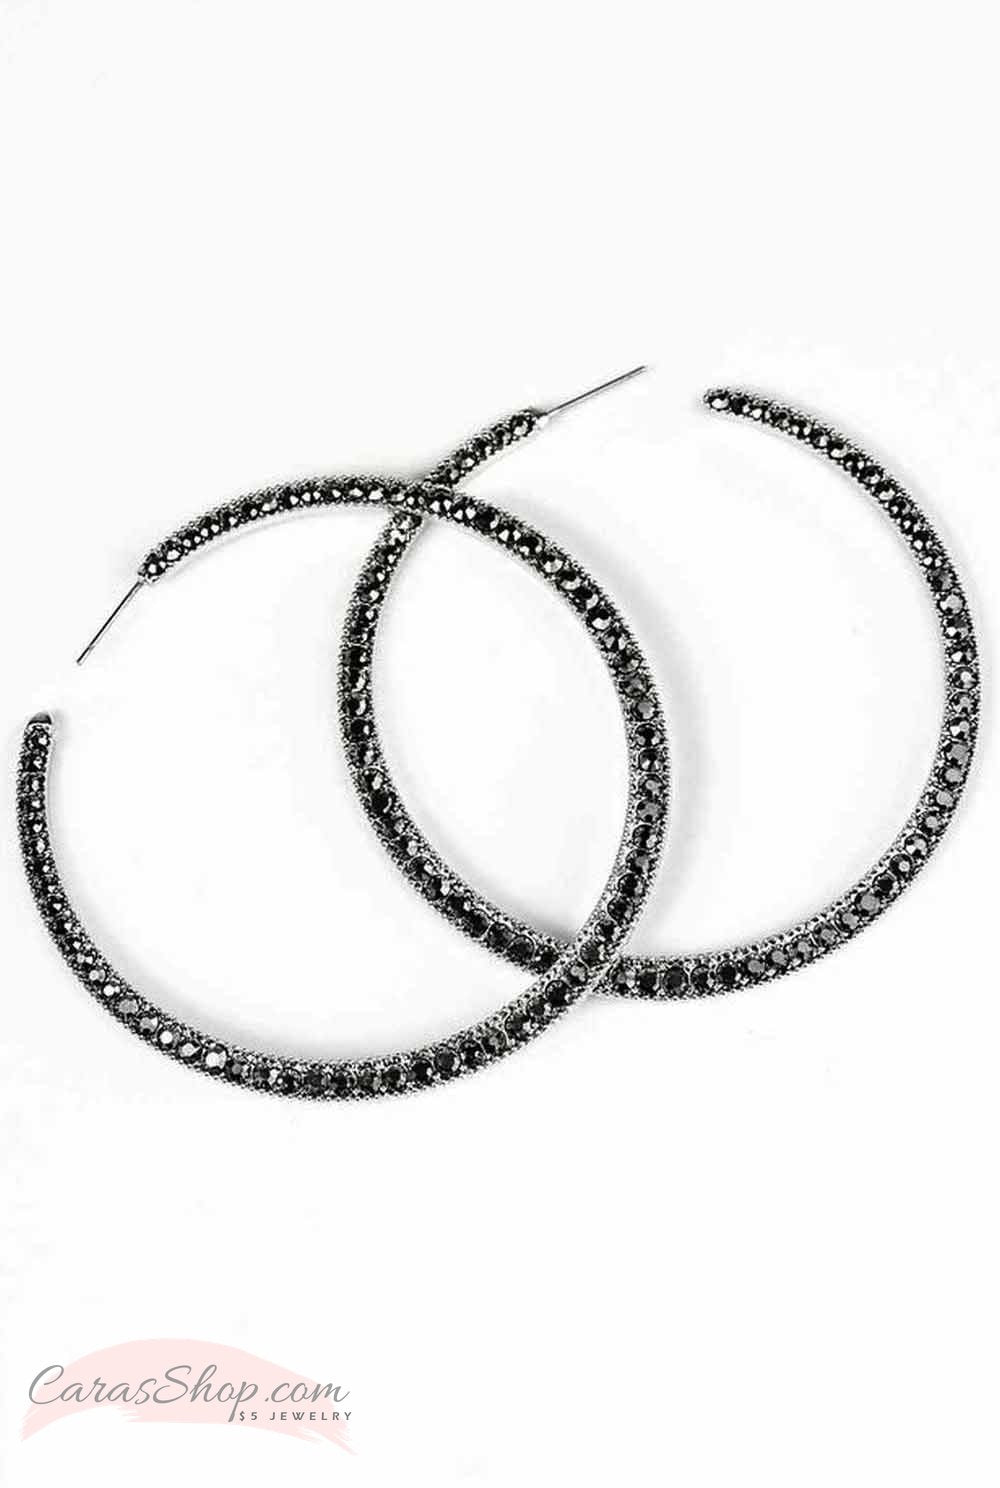 The Big Leagues - Silver Hematite Hoop Earrings - Paparazzi Accessories-CarasShop.com - $5 Jewelry by Cara Jewels